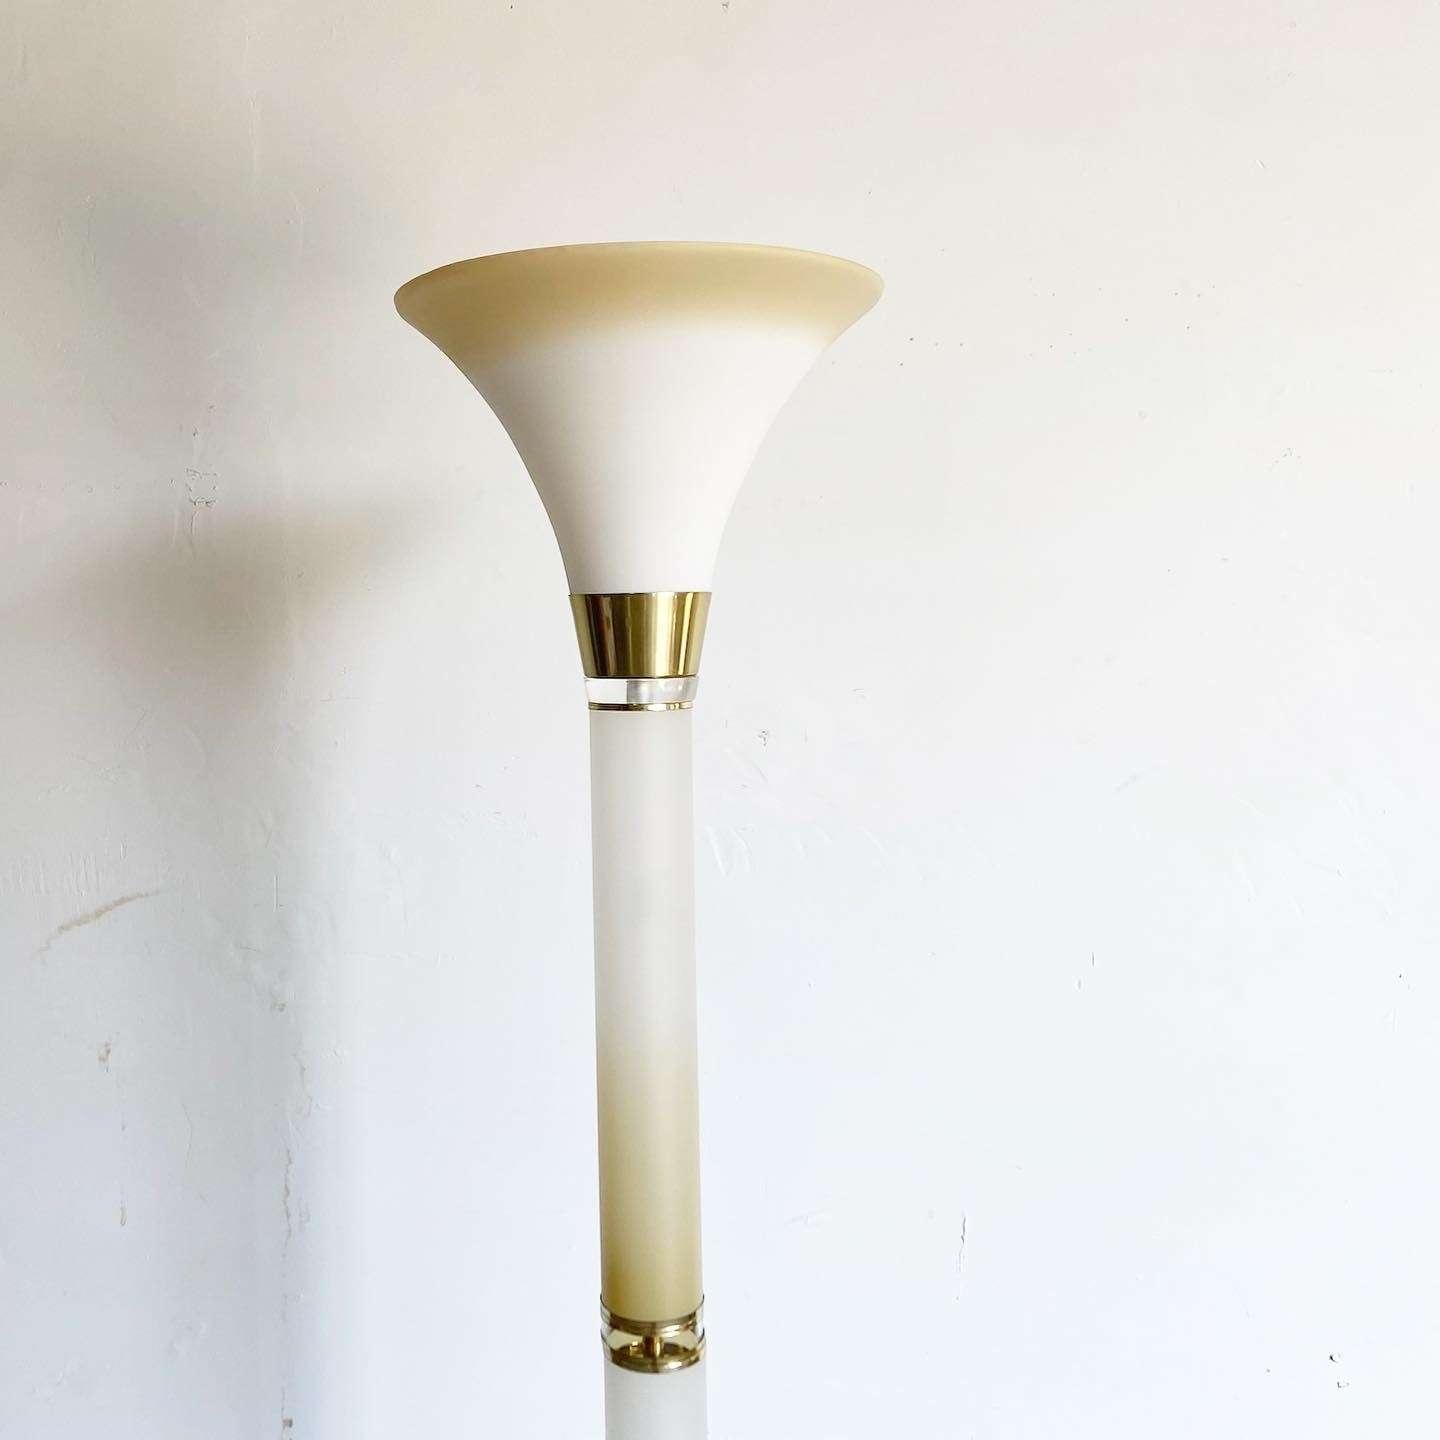 American Art Deco White and Tan Torchiere Floor Lamp